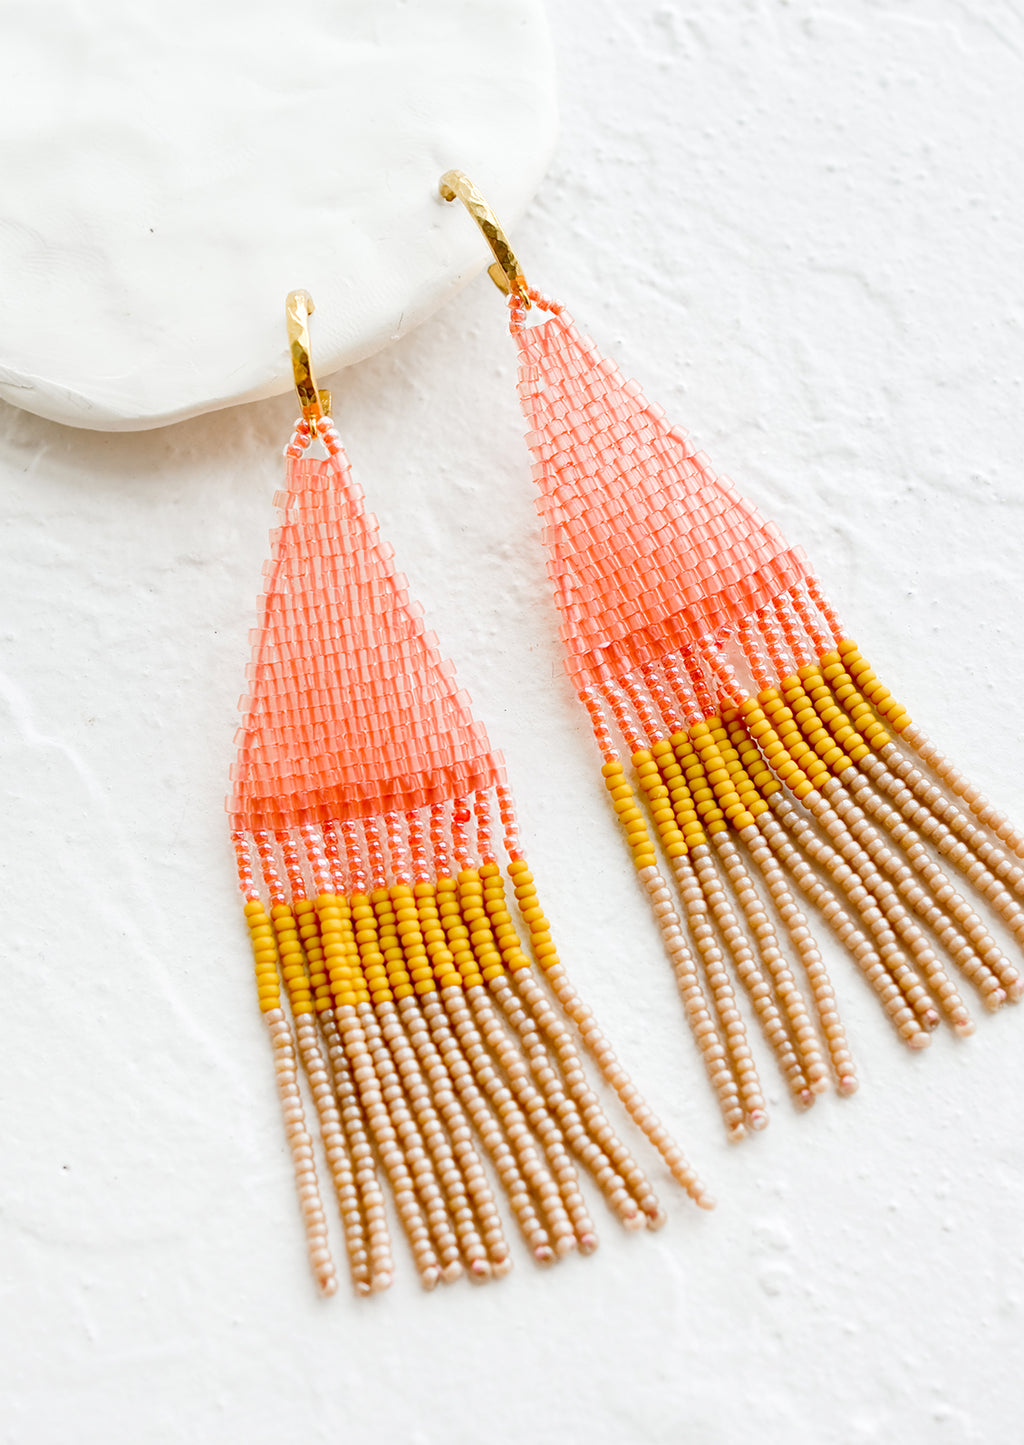 Cosmo Multi: Beaded earrings featuring pink, yellow and brown beads layered into fringe, dangling from a gold hoop.